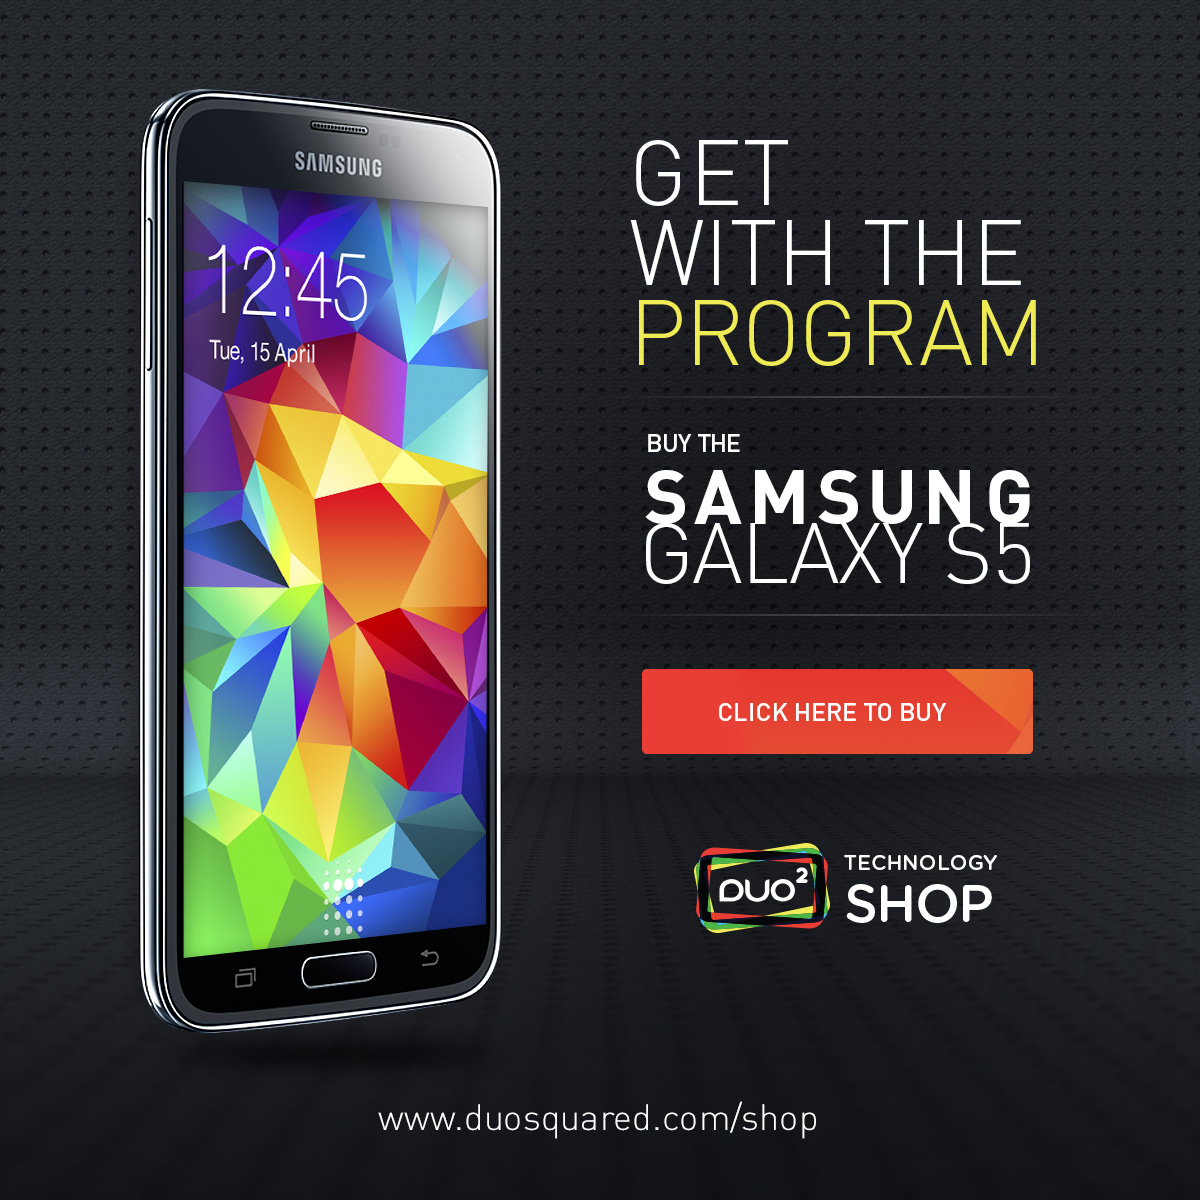 Samsung Galaxy S5 Namibia Buy Online Samsung Galaxy S5 available in Namibia Facebook 1200x1200 Buy